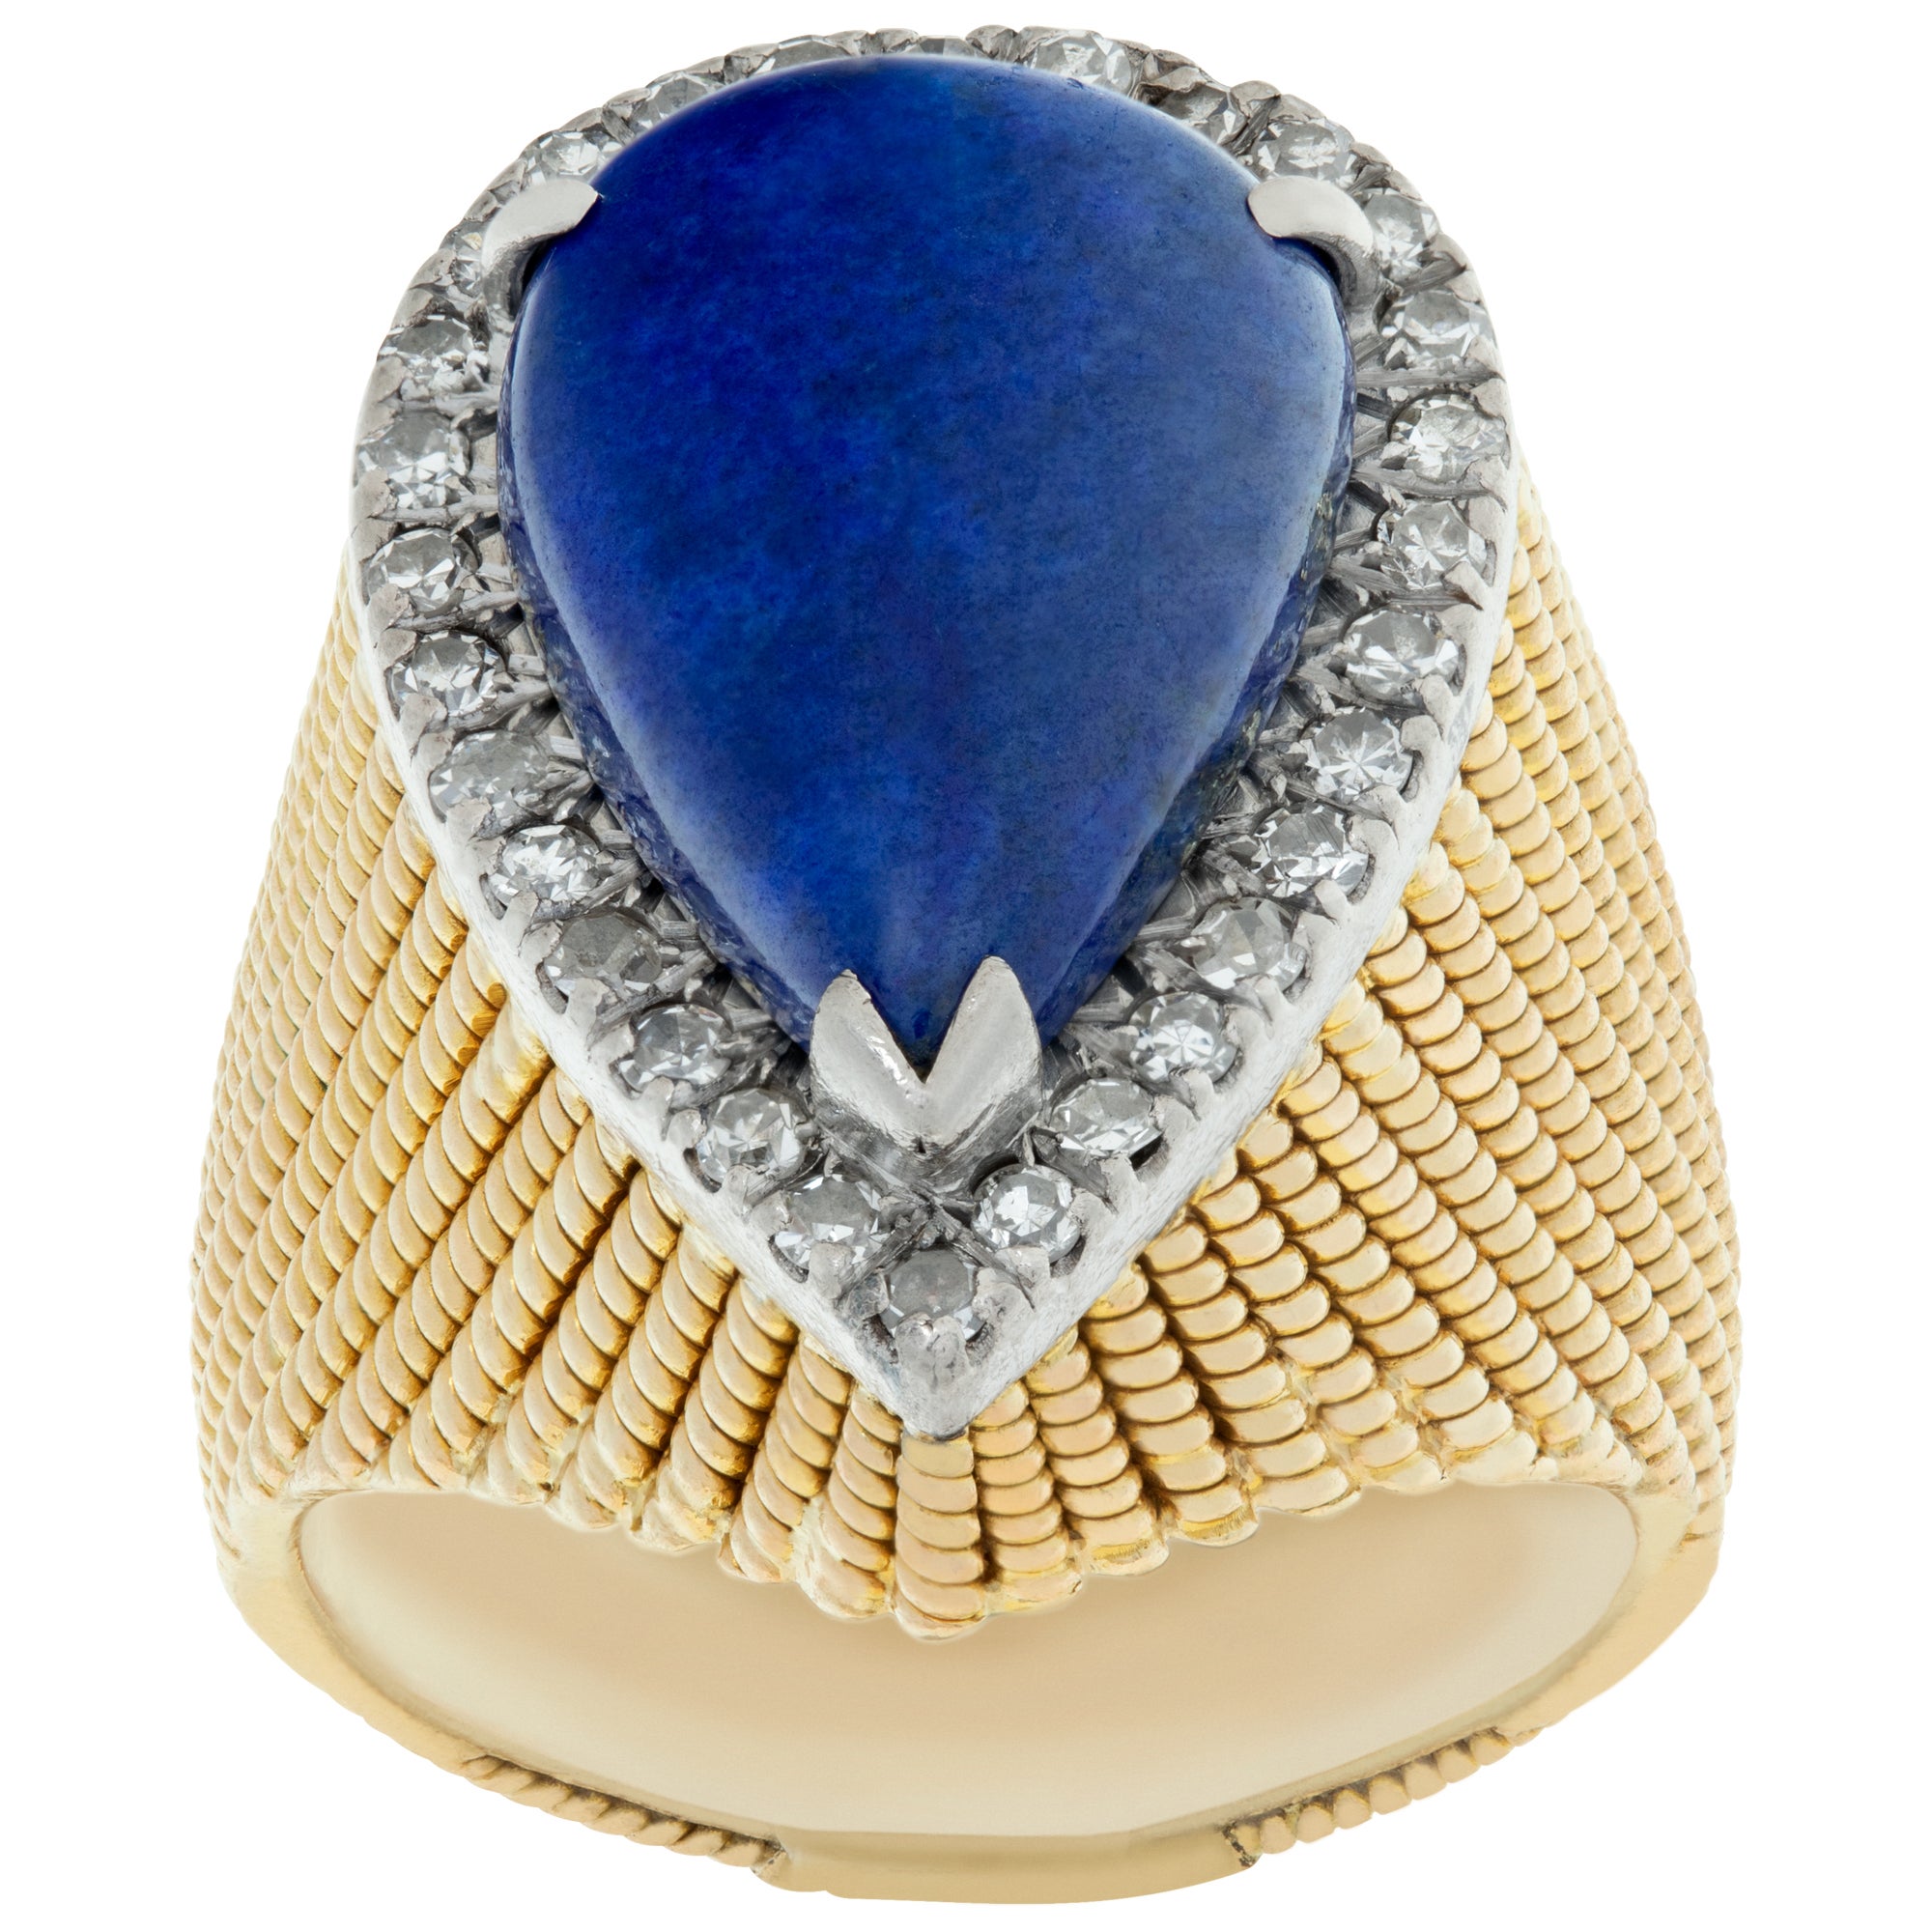 Cabochon Pear Shape Cut Lapis Lazuly Set in 14K Textured Yellow Gold Ring For Sale